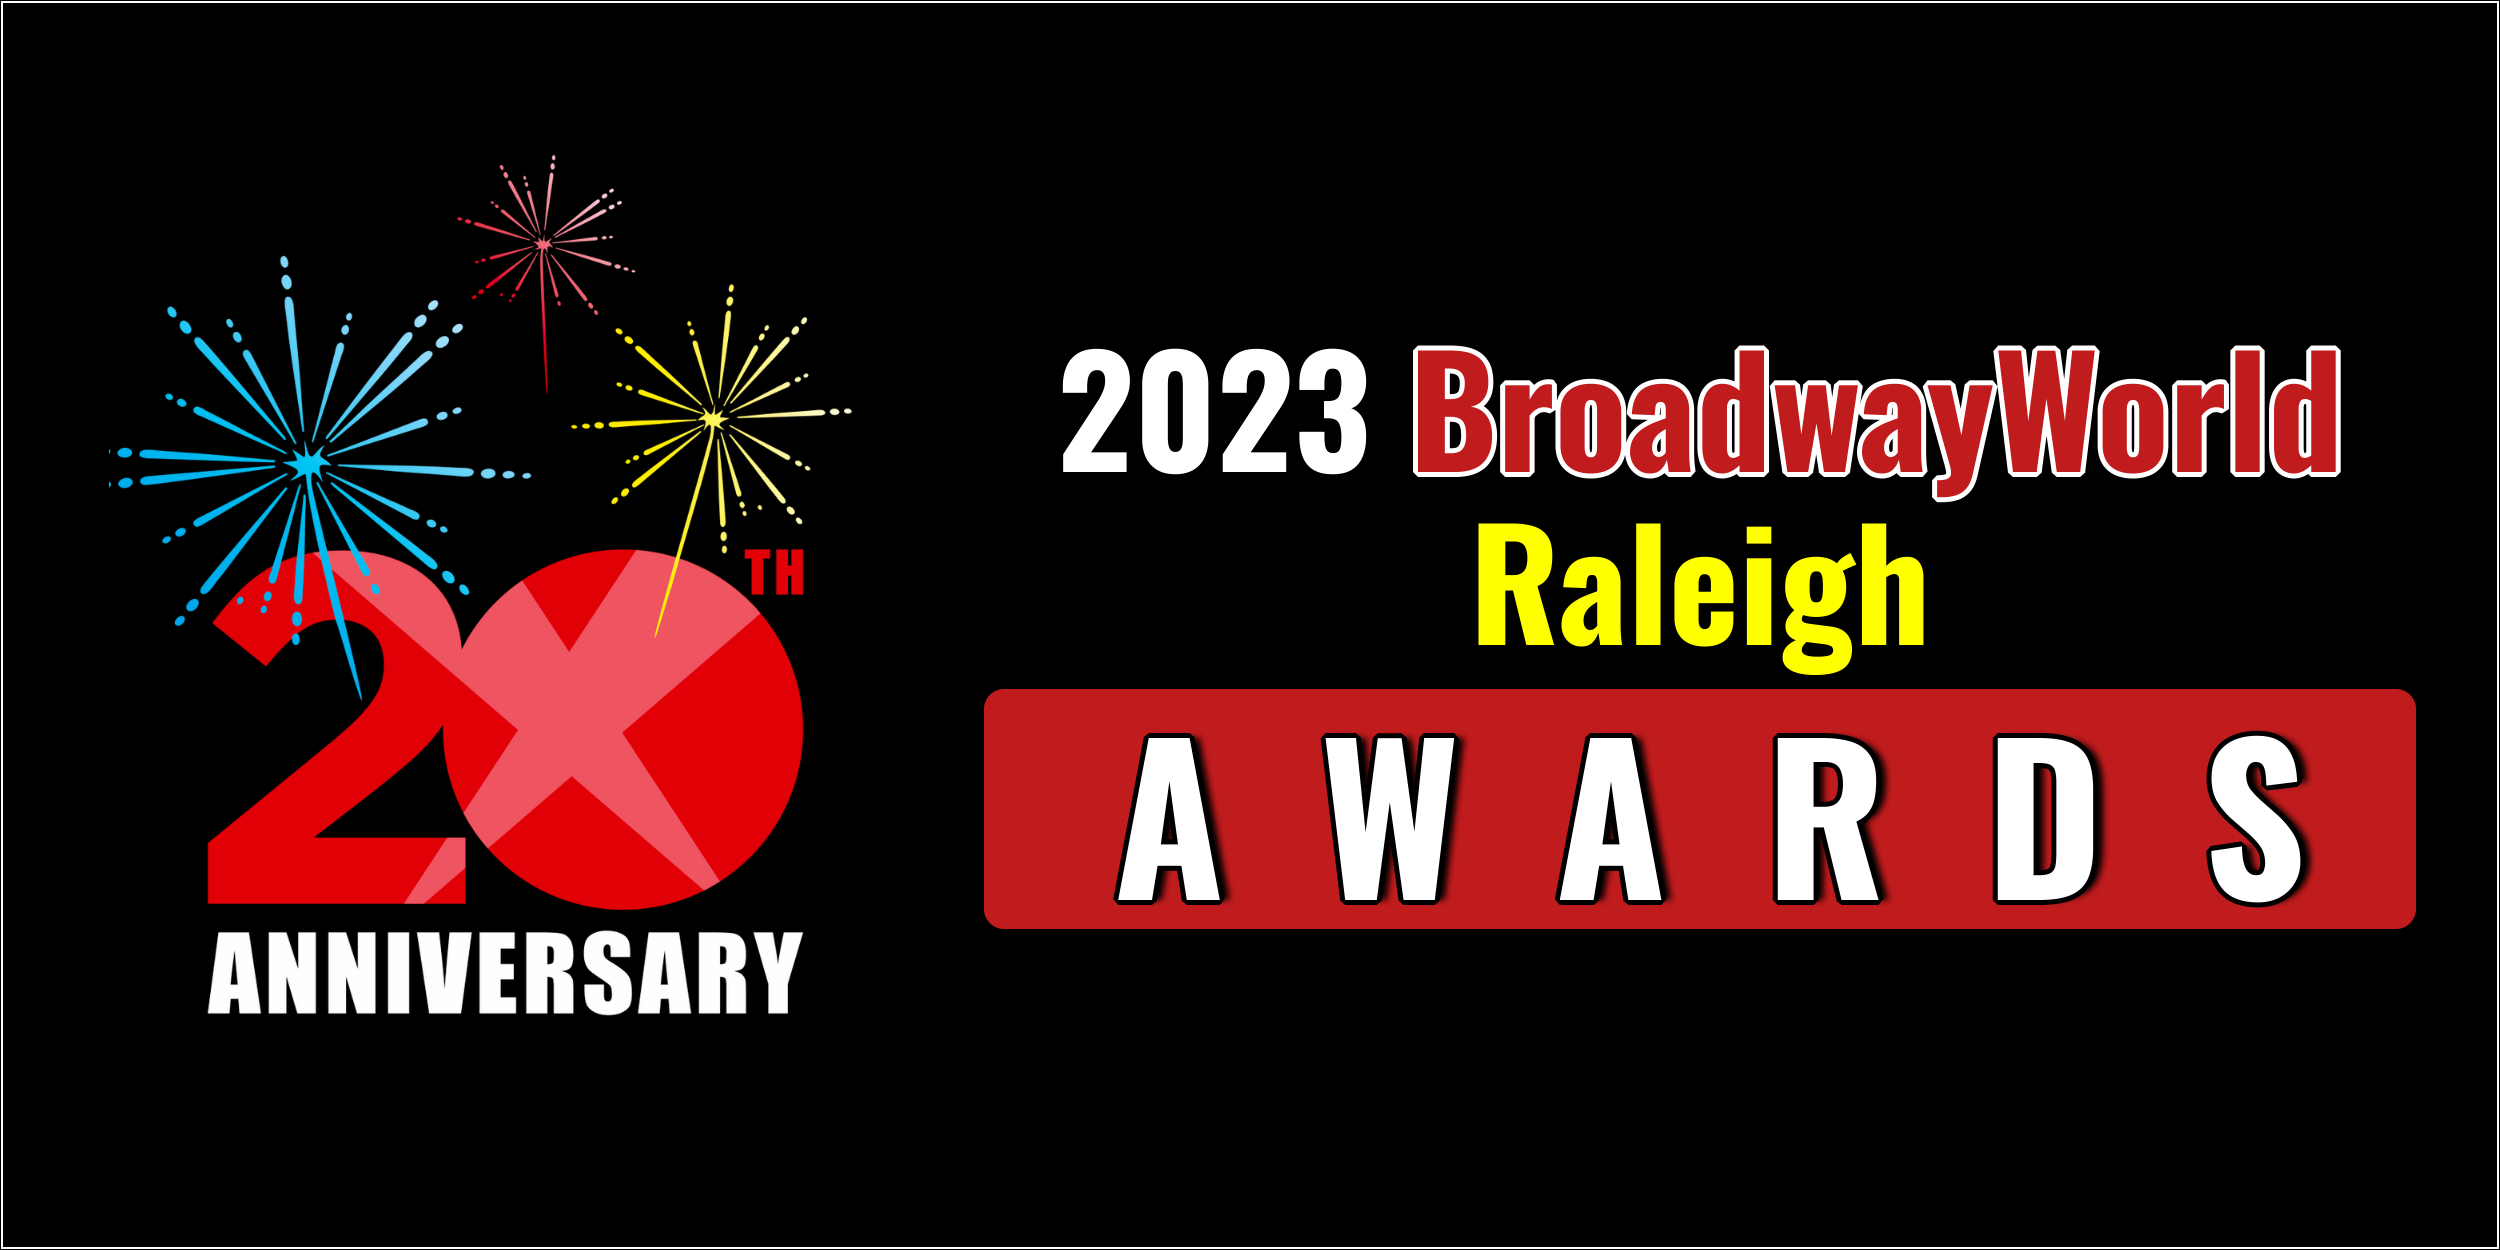 Latest Standings Announced For The 2023 BroadwayWorld Raleigh Awards; A MIDSUMMER NIGHT'S  Photo